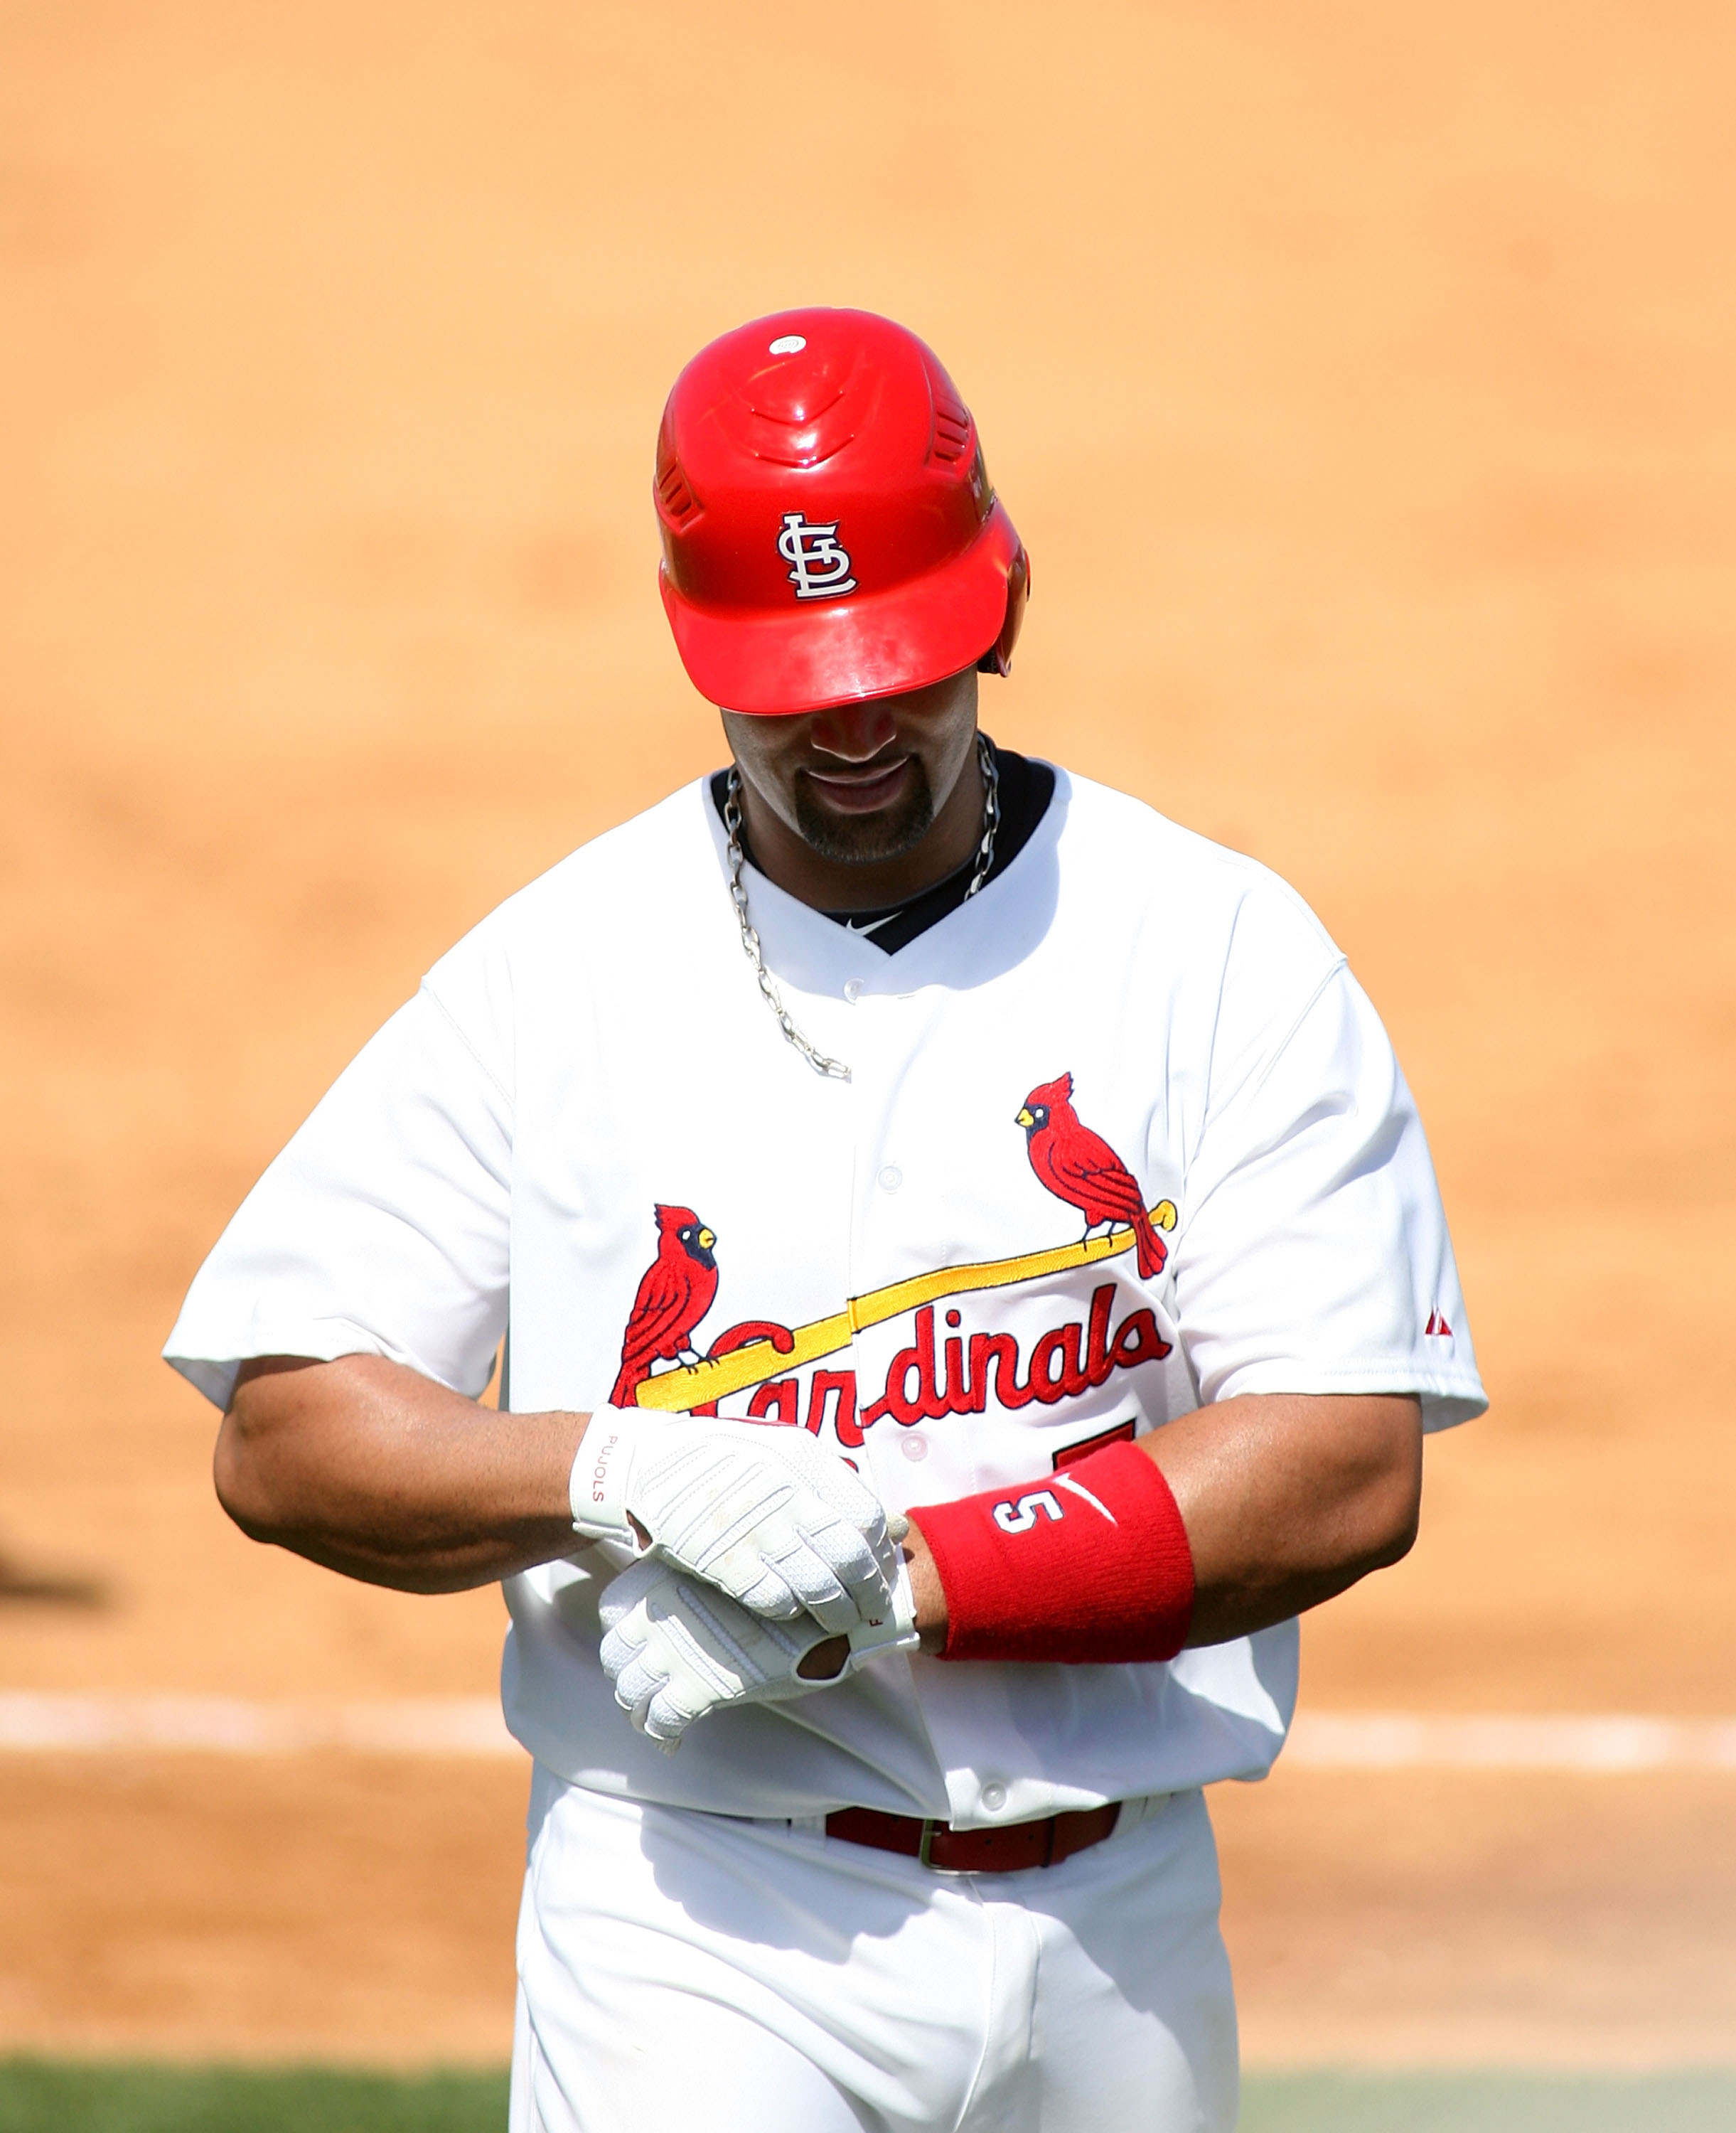 JUPITER, FL - FEBRUARY 28:  Albert Pujols #5 of the St. Louis Cardinals bats against the Florida Marlins at Roger Dean Stadium on February 28, 2011 in Jupiter, Florida.  (Photo by Marc Serota/Getty Images)